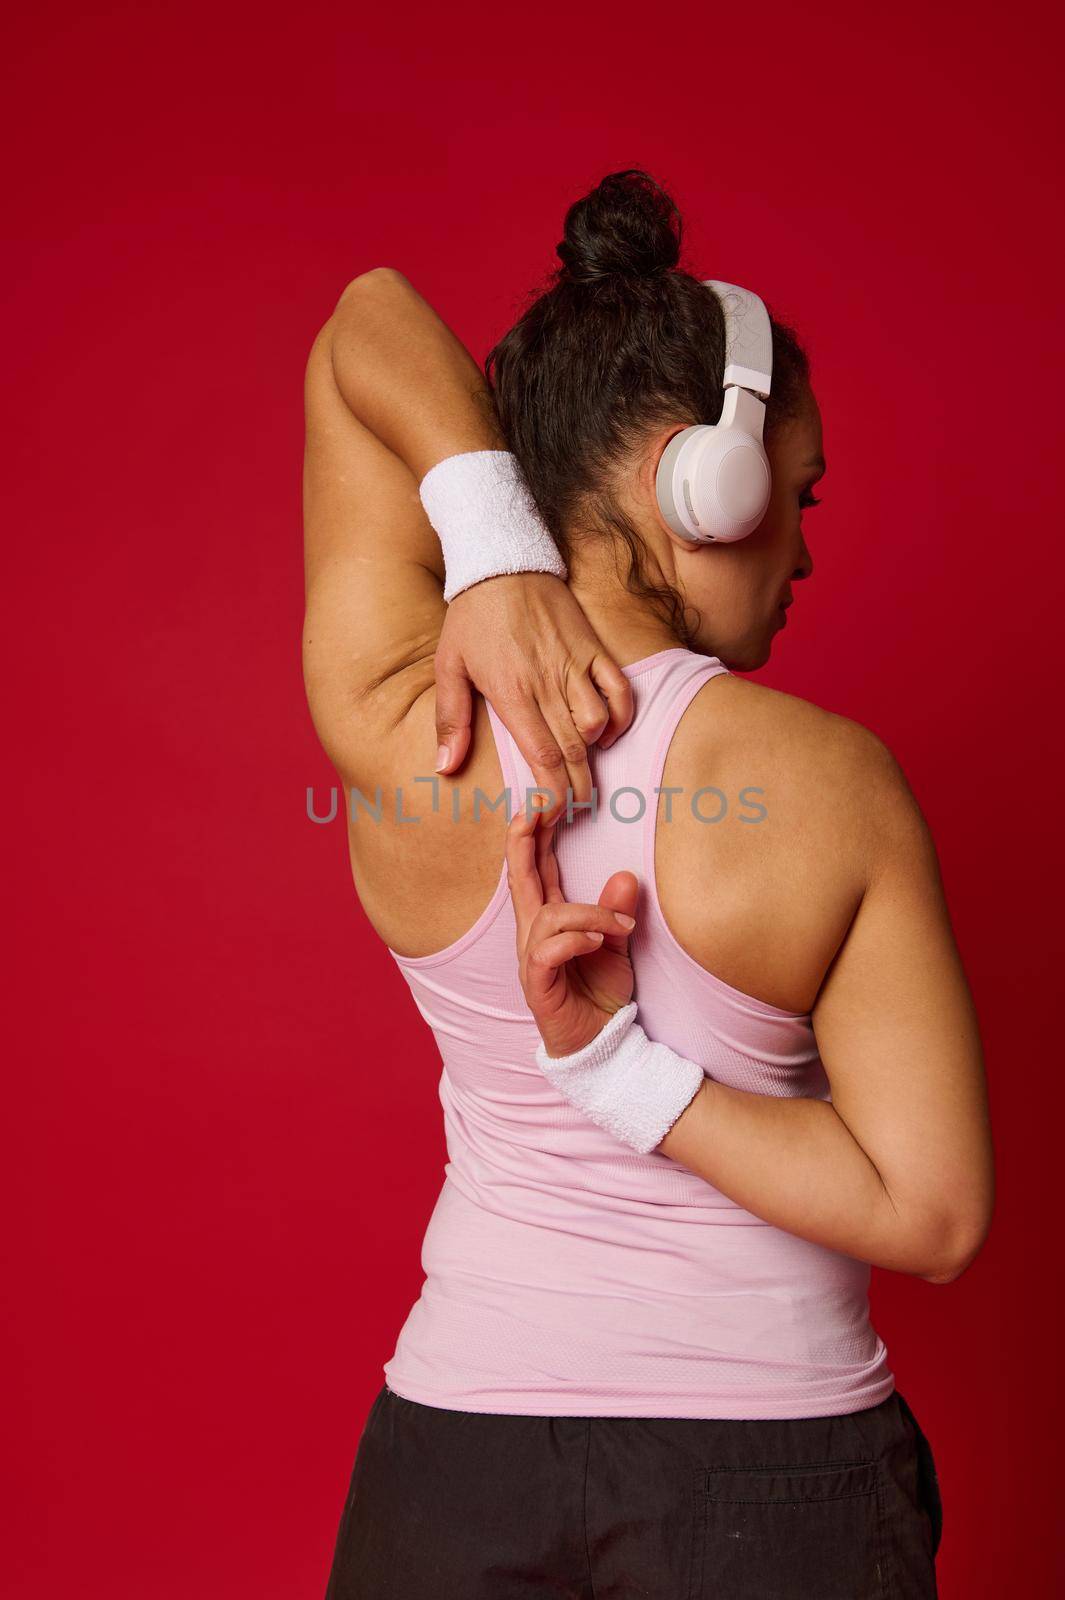 Portrait of a sportswoman in activewear and wireless headphone doing stretching exercises on arms standing back to the camera against red background by artgf